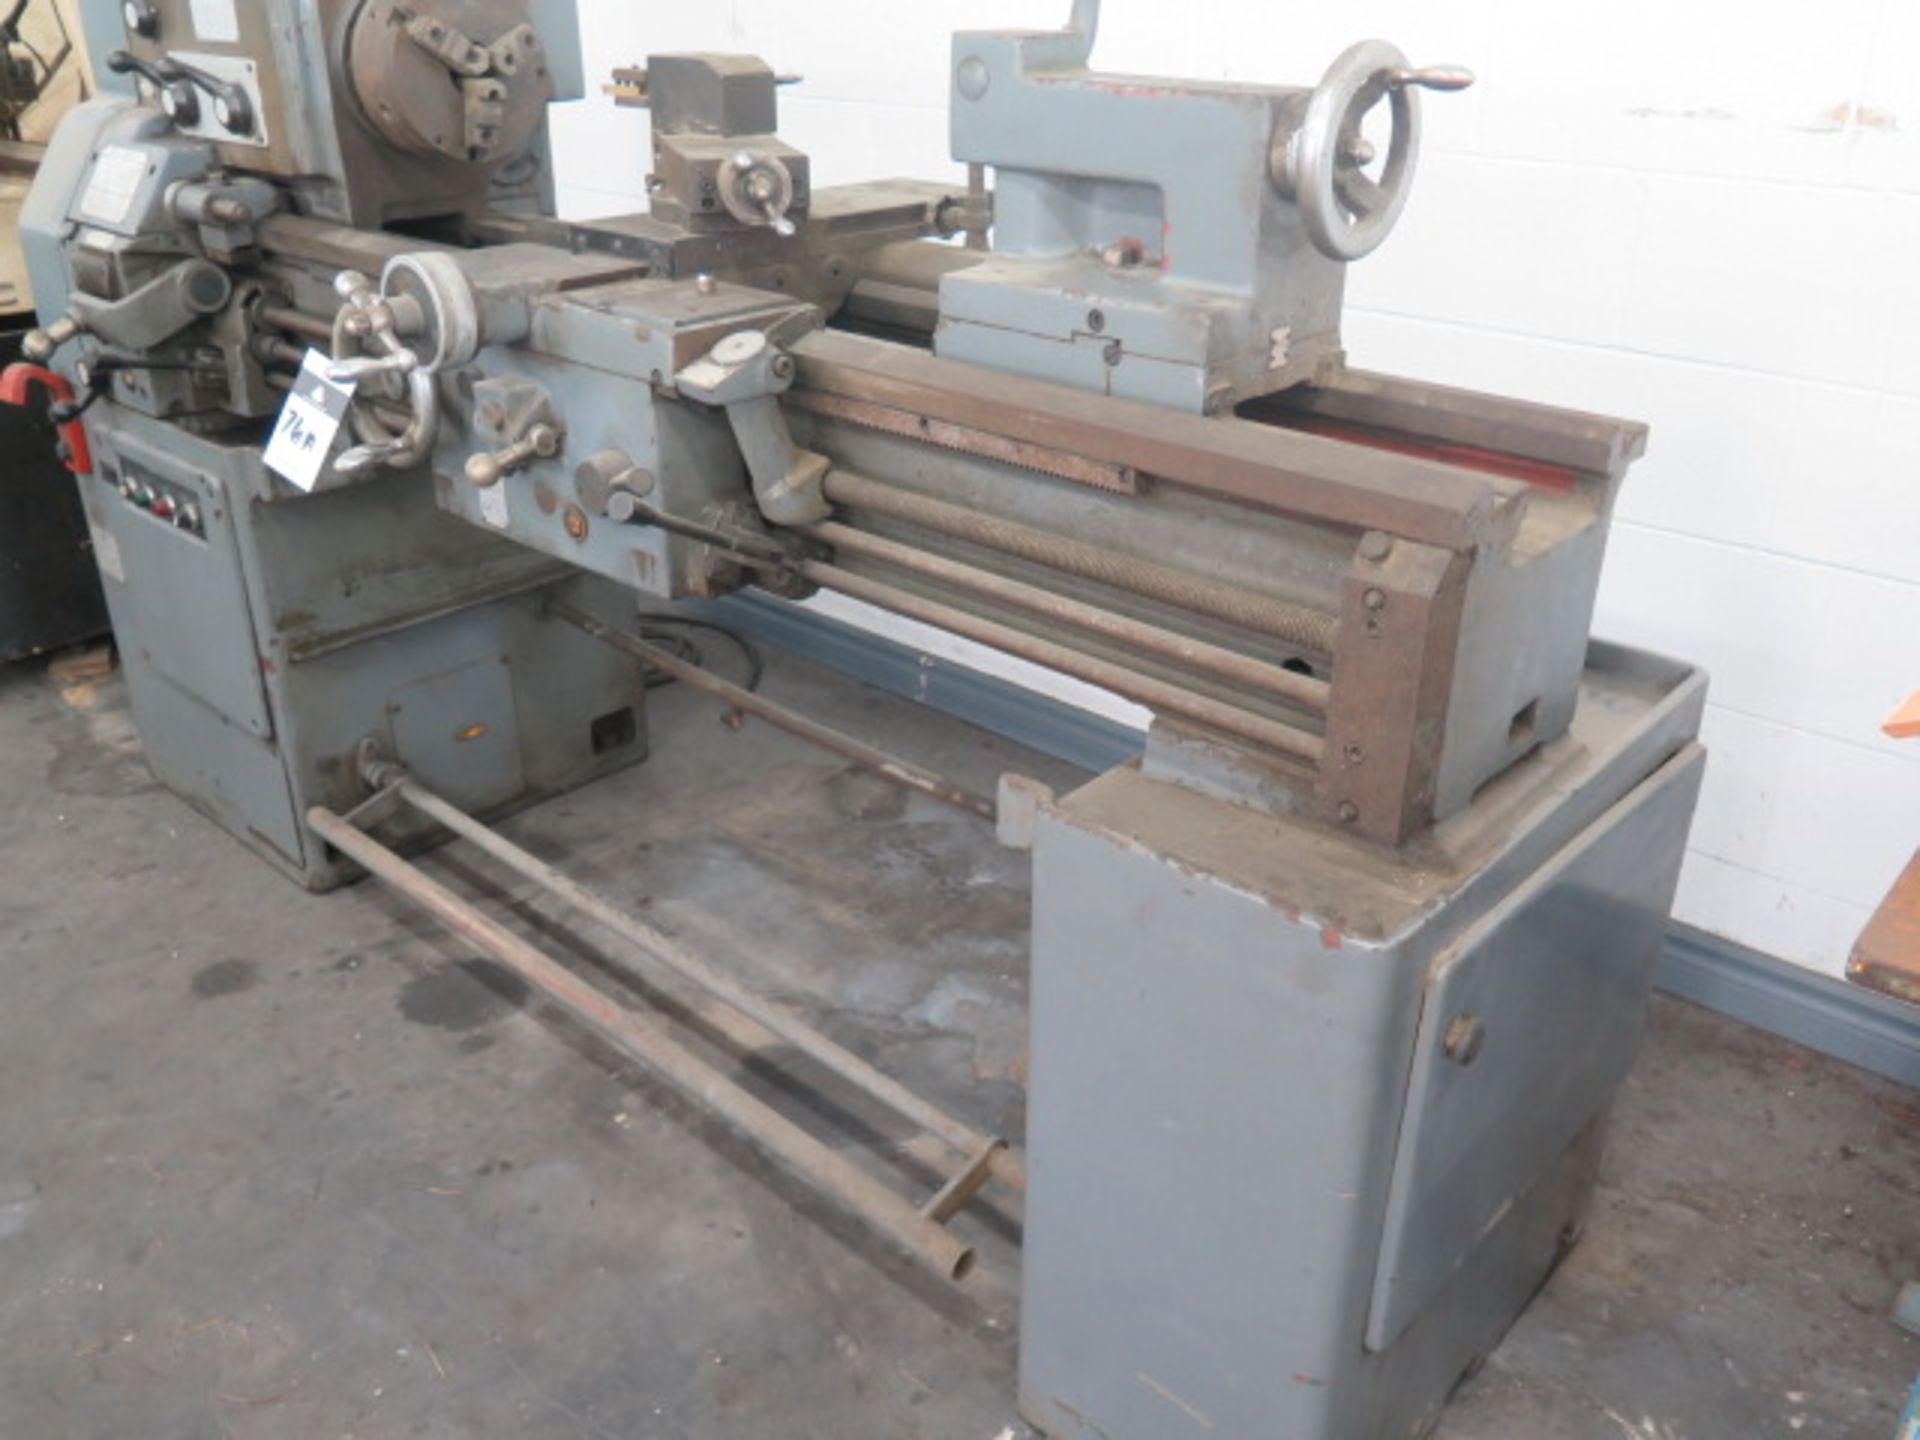 Webb 16" x 42" Geared Head Lathe w/ 50-1850 RPM, Inch Threading, Tailstock, KDK Tool (NO CHIP TRAY) - Image 3 of 11